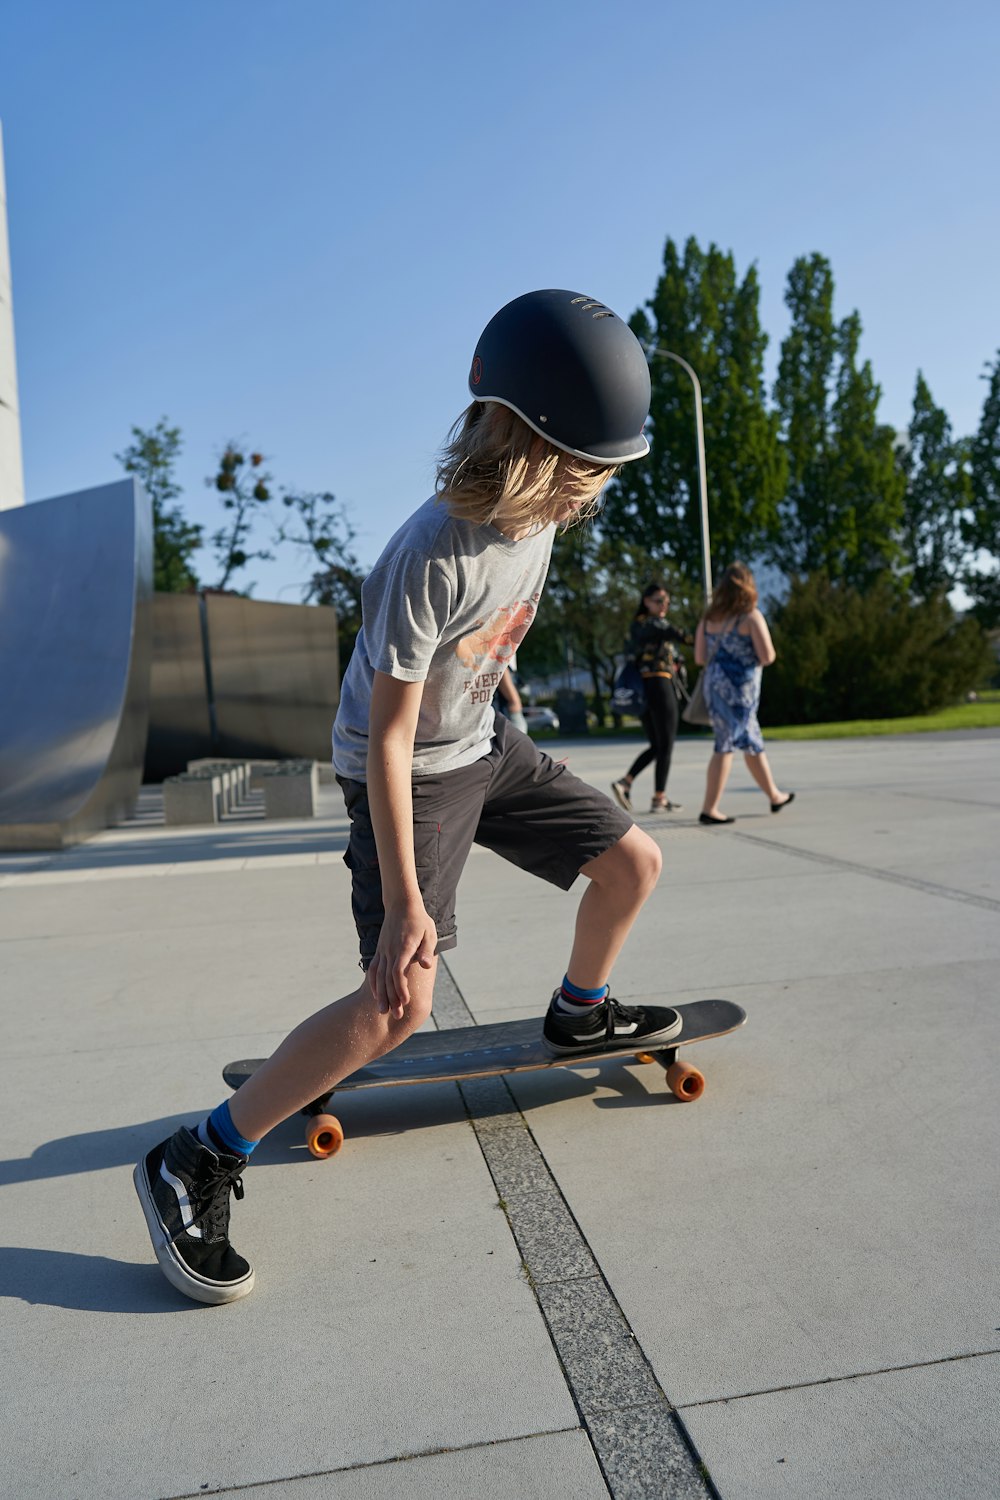 man in gray t-shirt and black shorts playing skateboard during daytime